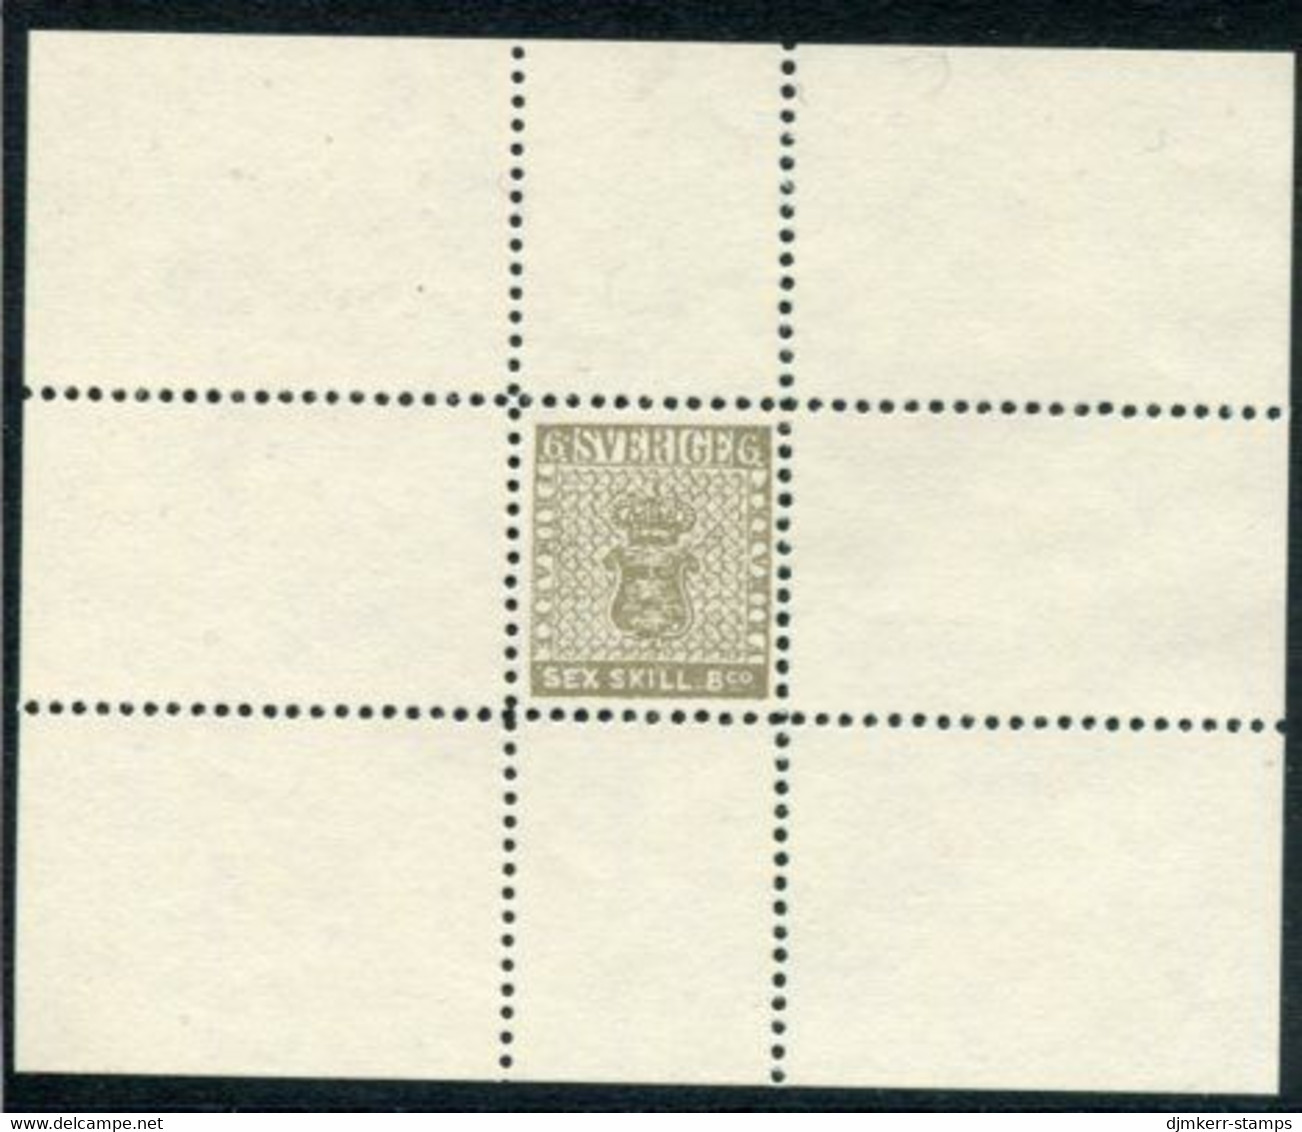 SWEDEN 1855 6 Skilling Banco 1977 Reprint By Swedish Philatelic Federation MNH Without Gum (*). - Proofs & Reprints